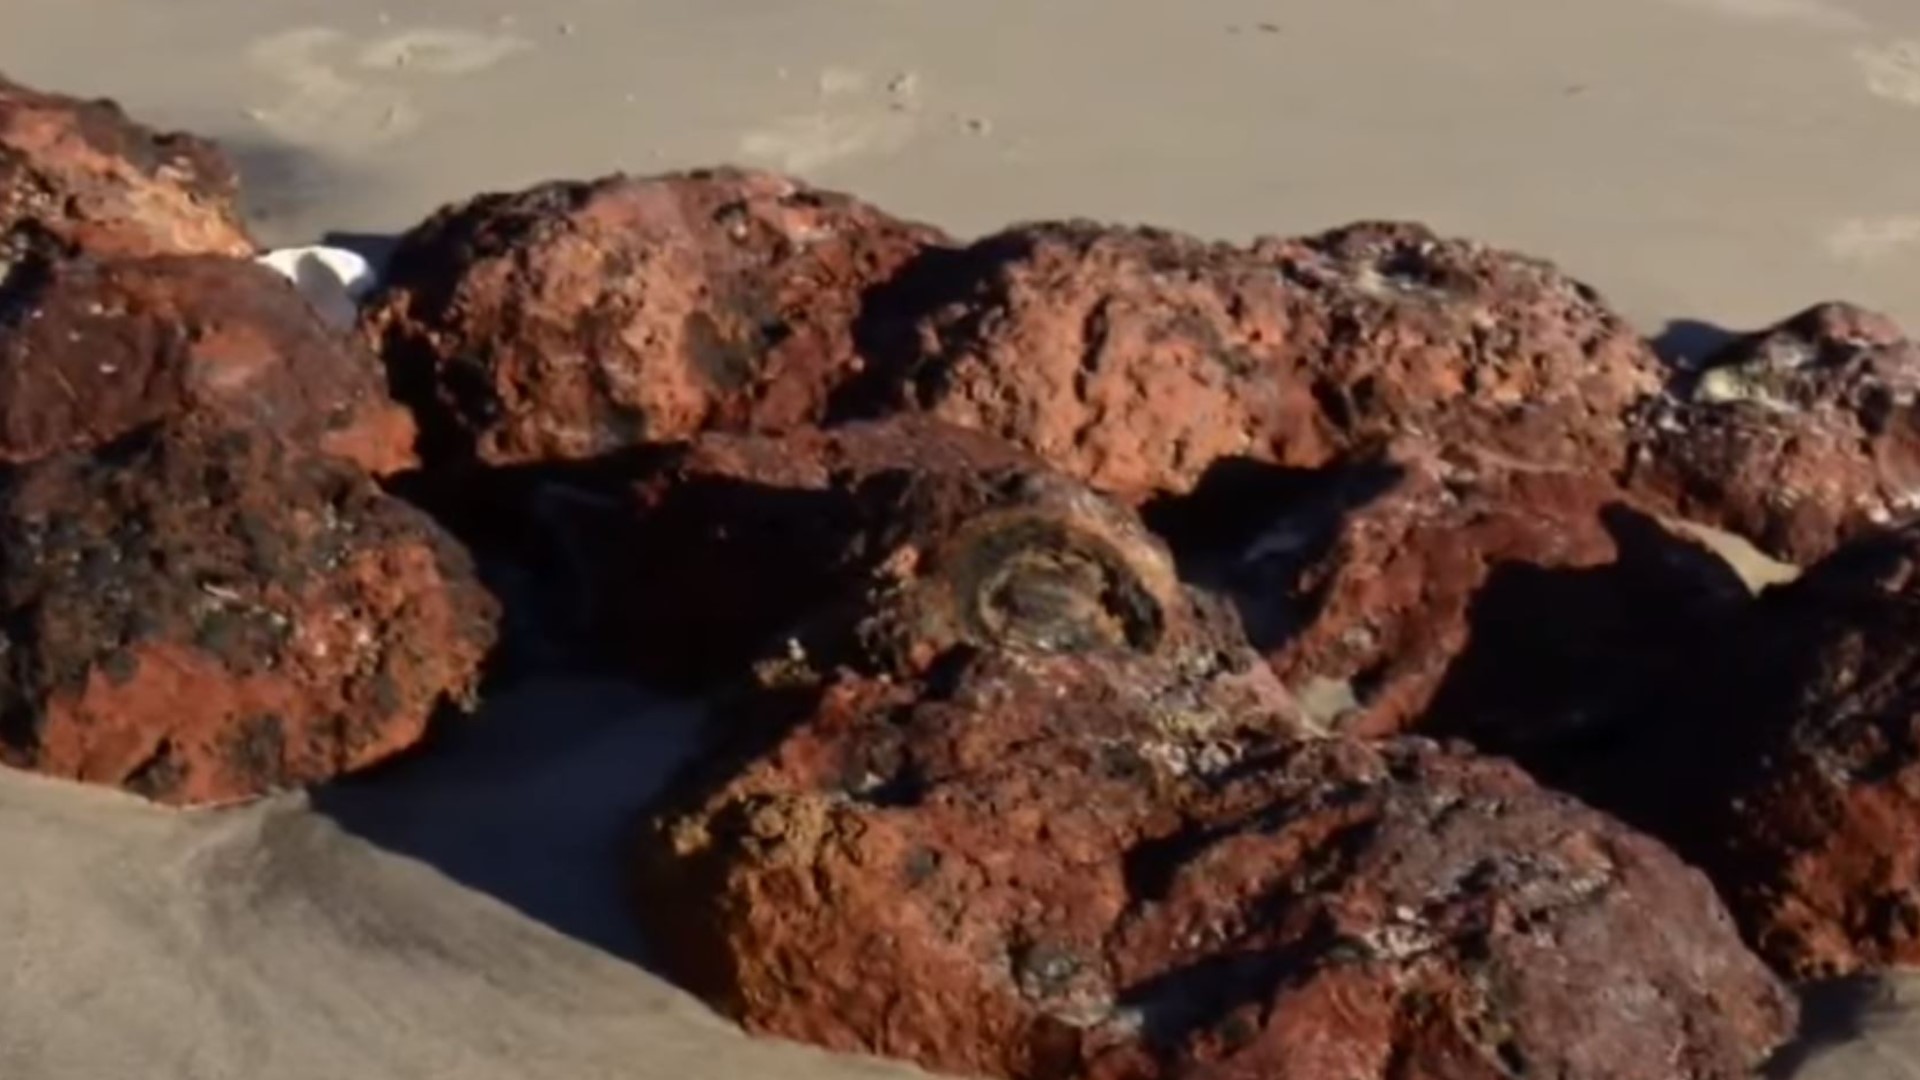 A bomb squad was called to a South Carolina beach after Hurricane Matthew apparently unearthed old Civil War cannonballs from the sand.